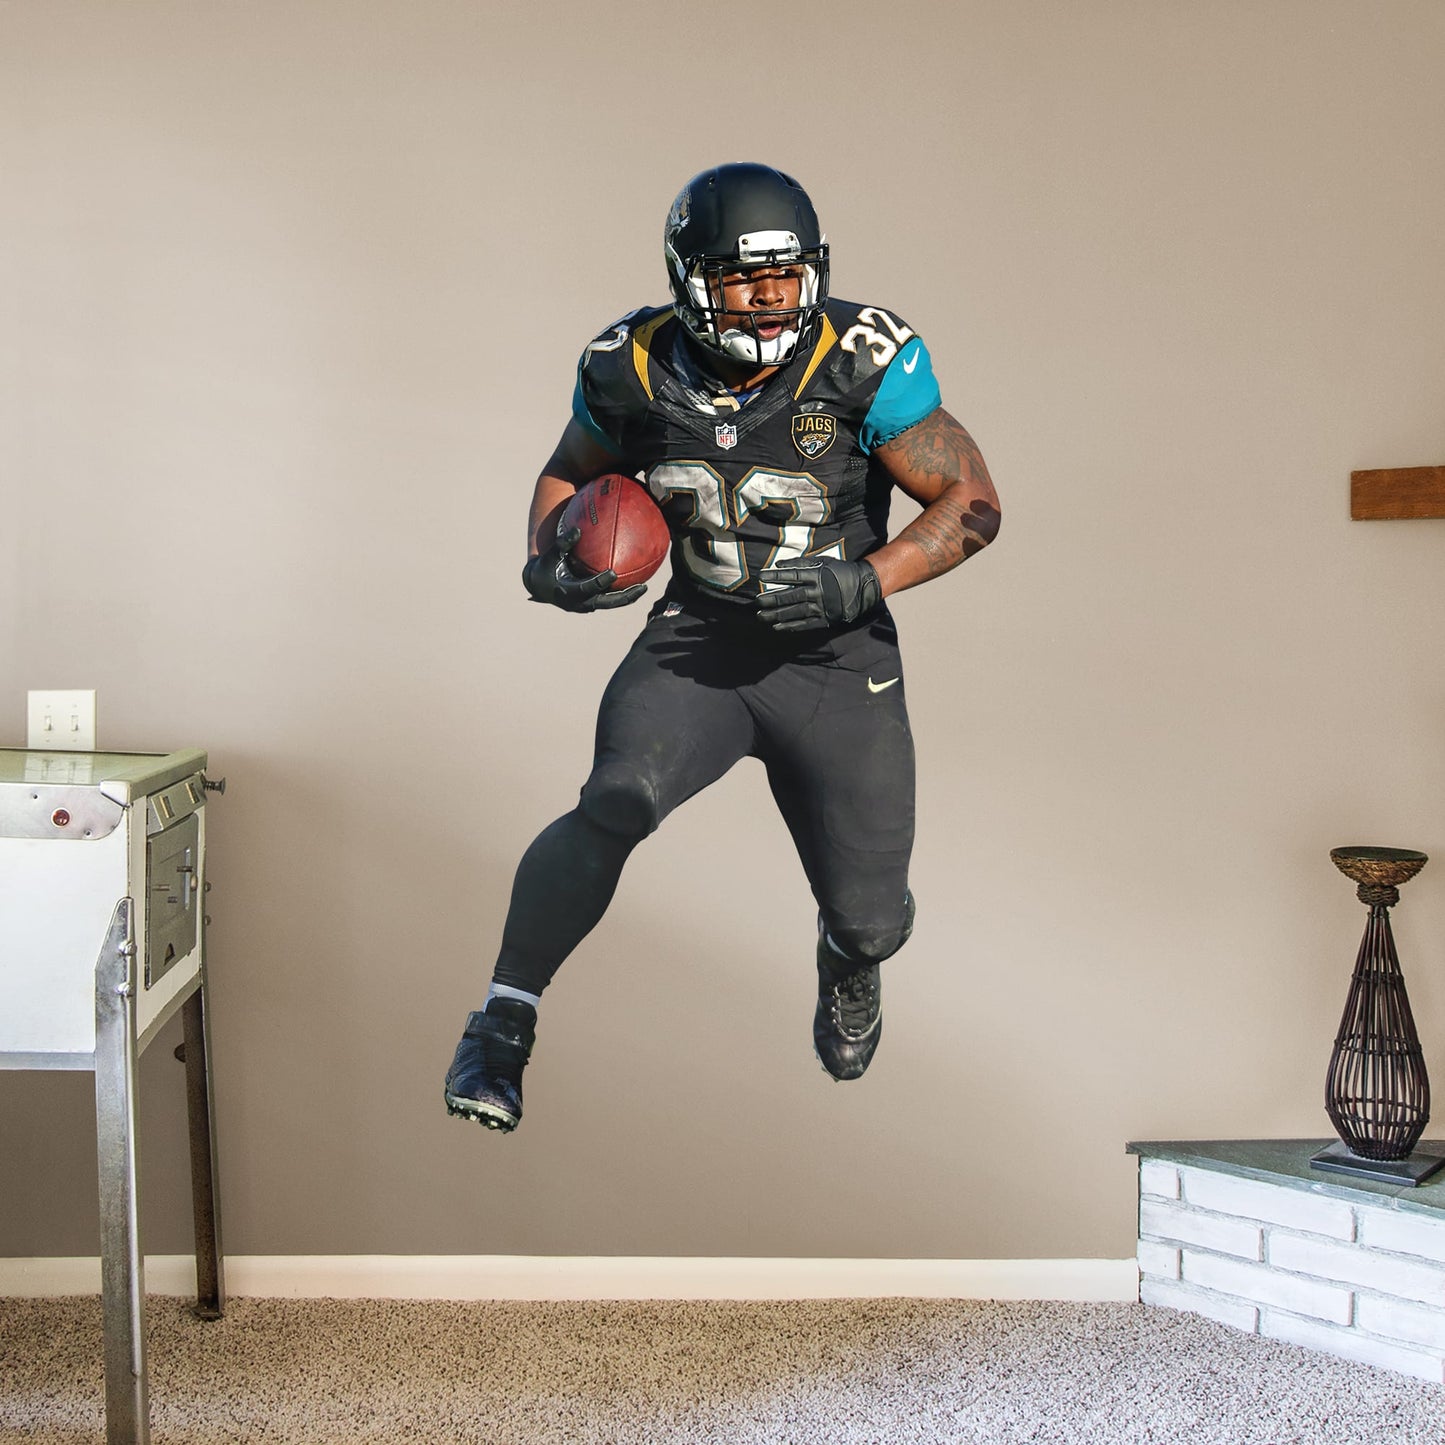 Life-Size Athlete + 2 Decals (40"W x 70"H) Bring the action of the NFL into your home with a wall decal of Maurice Jones-Drew! High quality, durable, and tear resistant, you'll be able to stick and move it as many times as you want to create the ultimate football experience in any room!